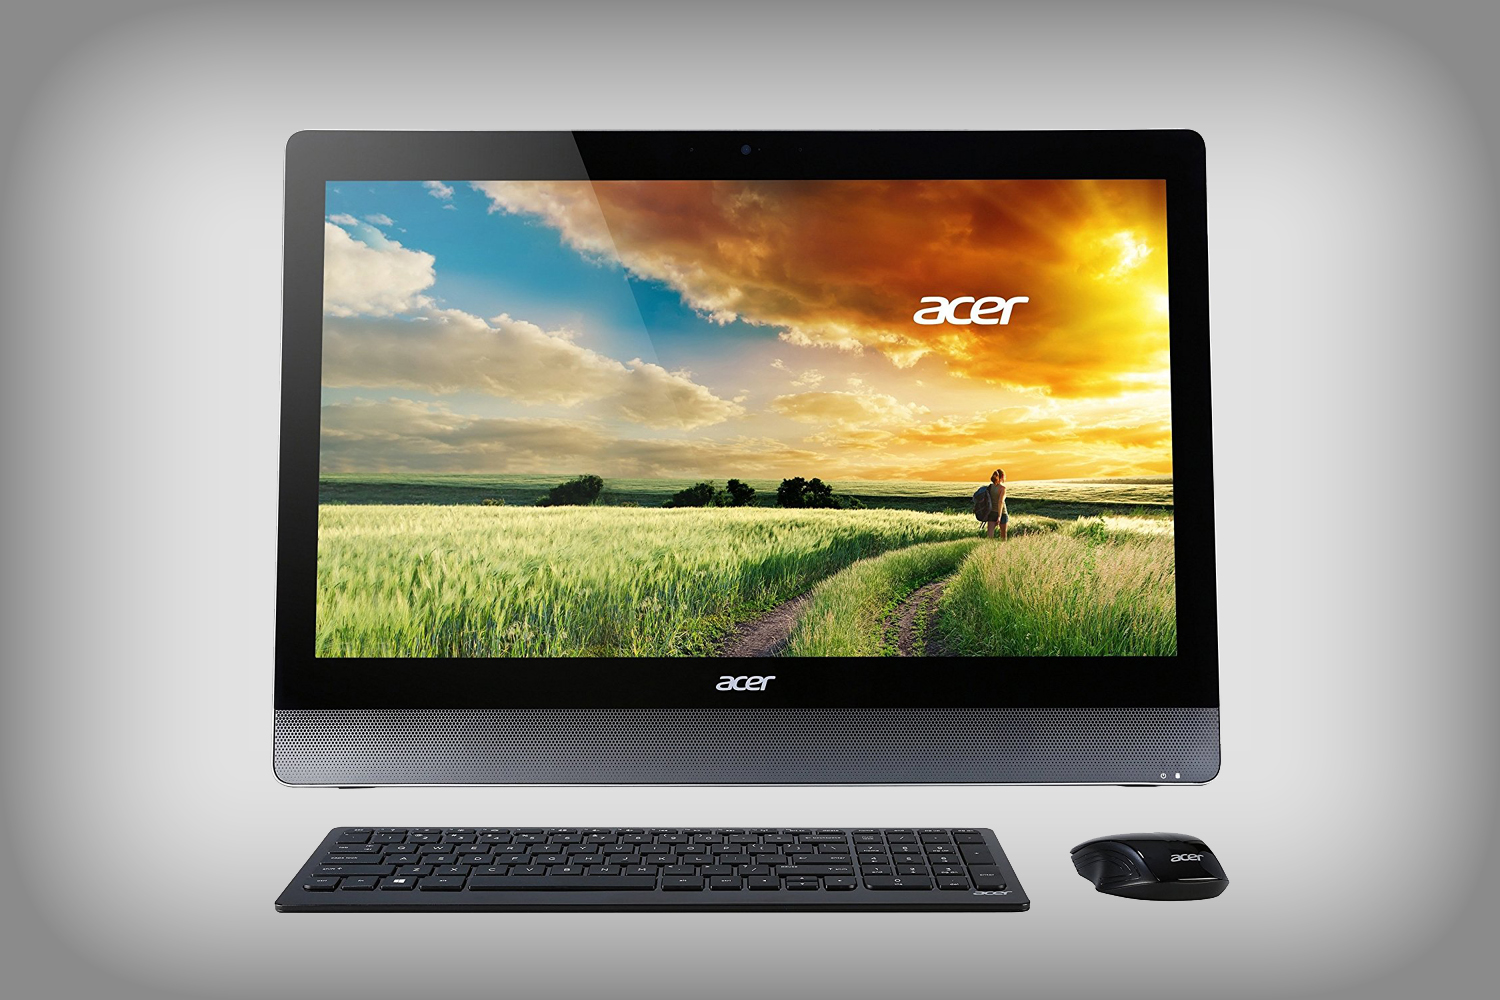 Acer Aspire U5 all-in-one